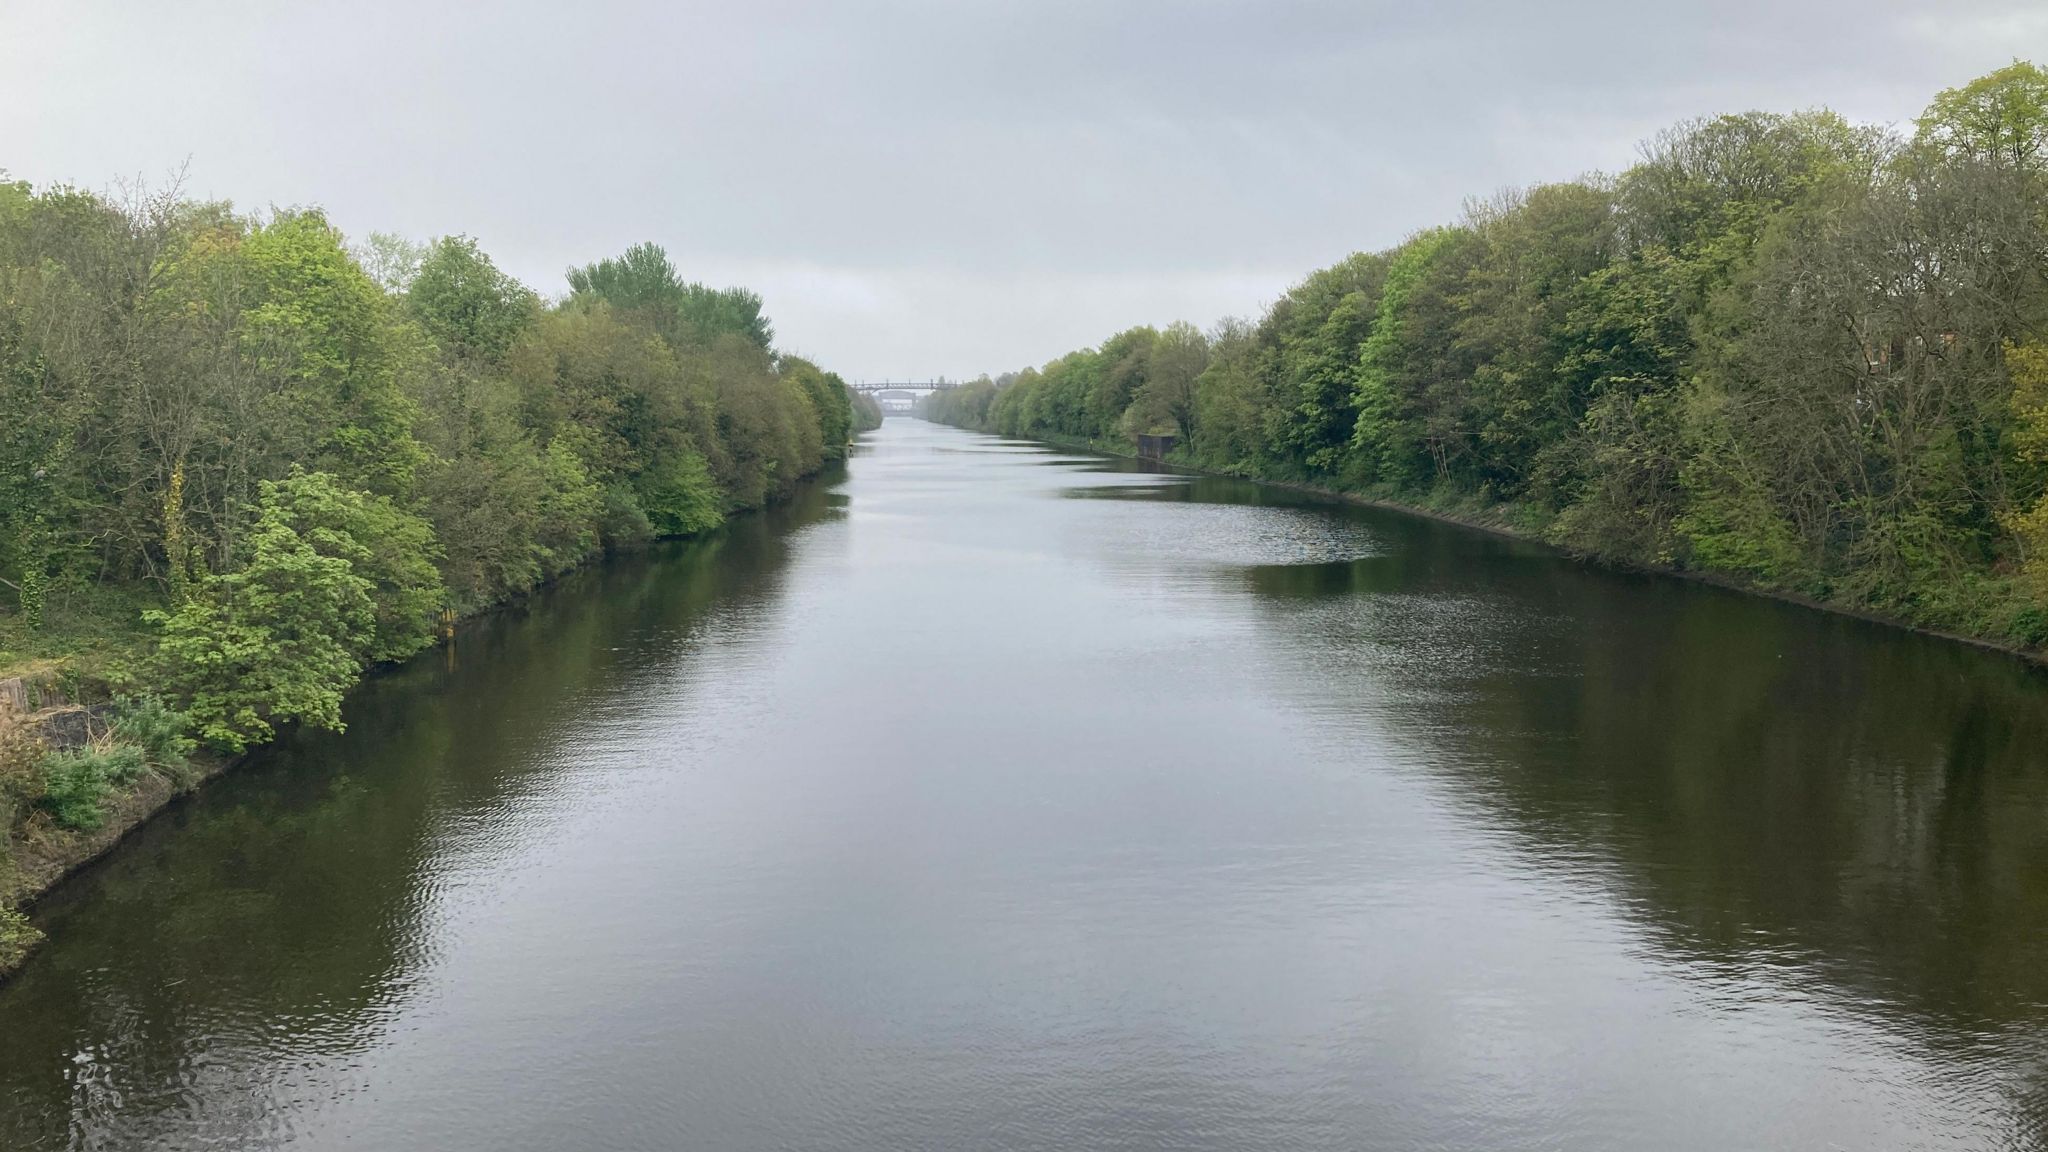 View of the Manchester Ship Canal